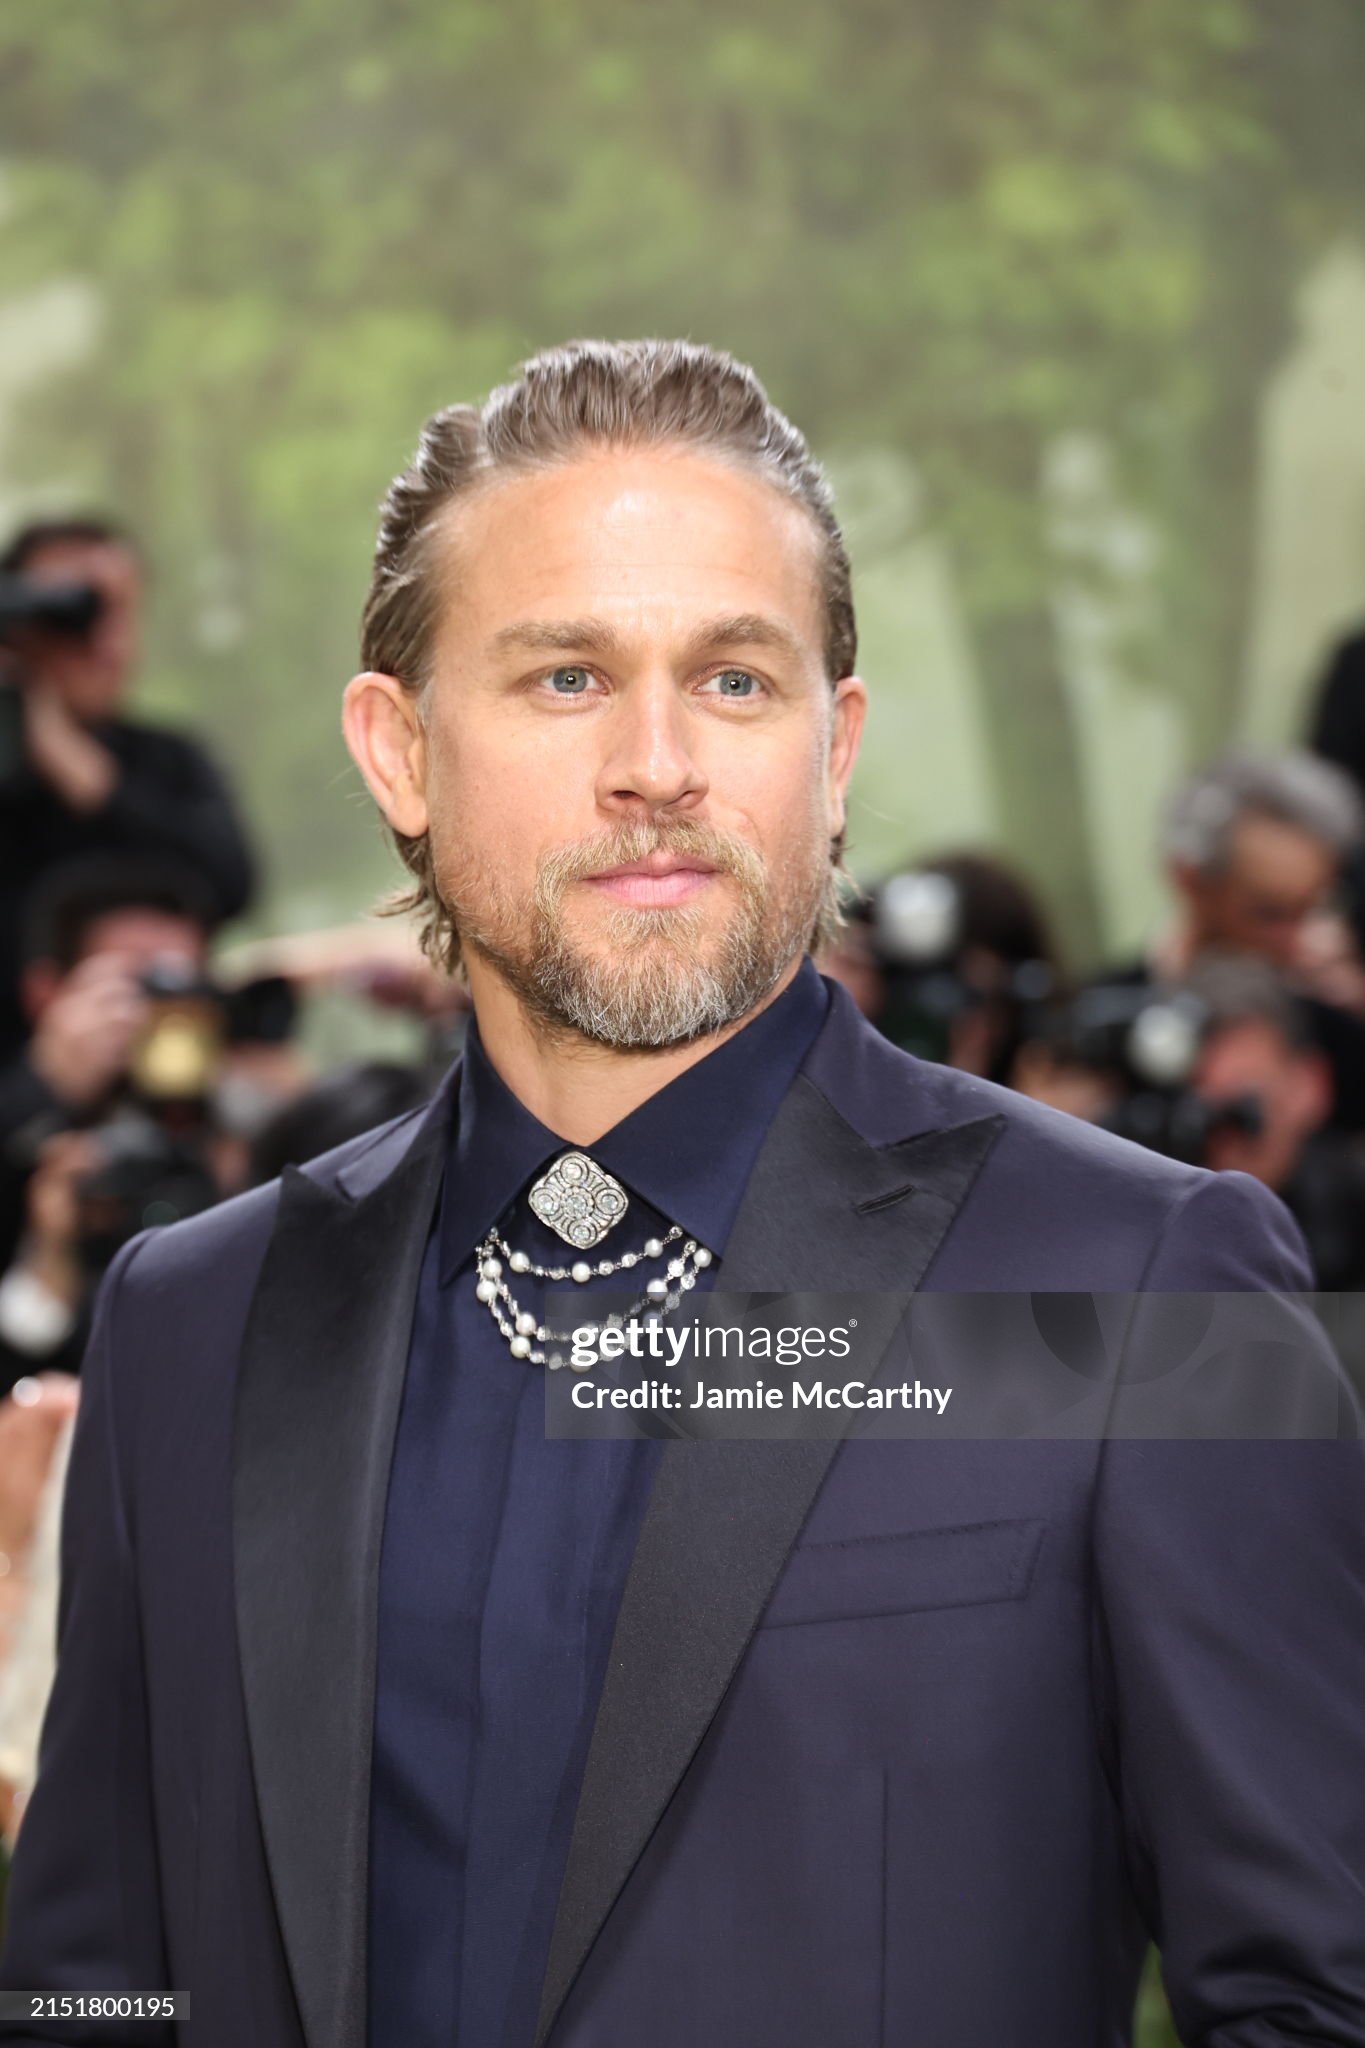 gettyimages-2151800195-2048x2048.jpg